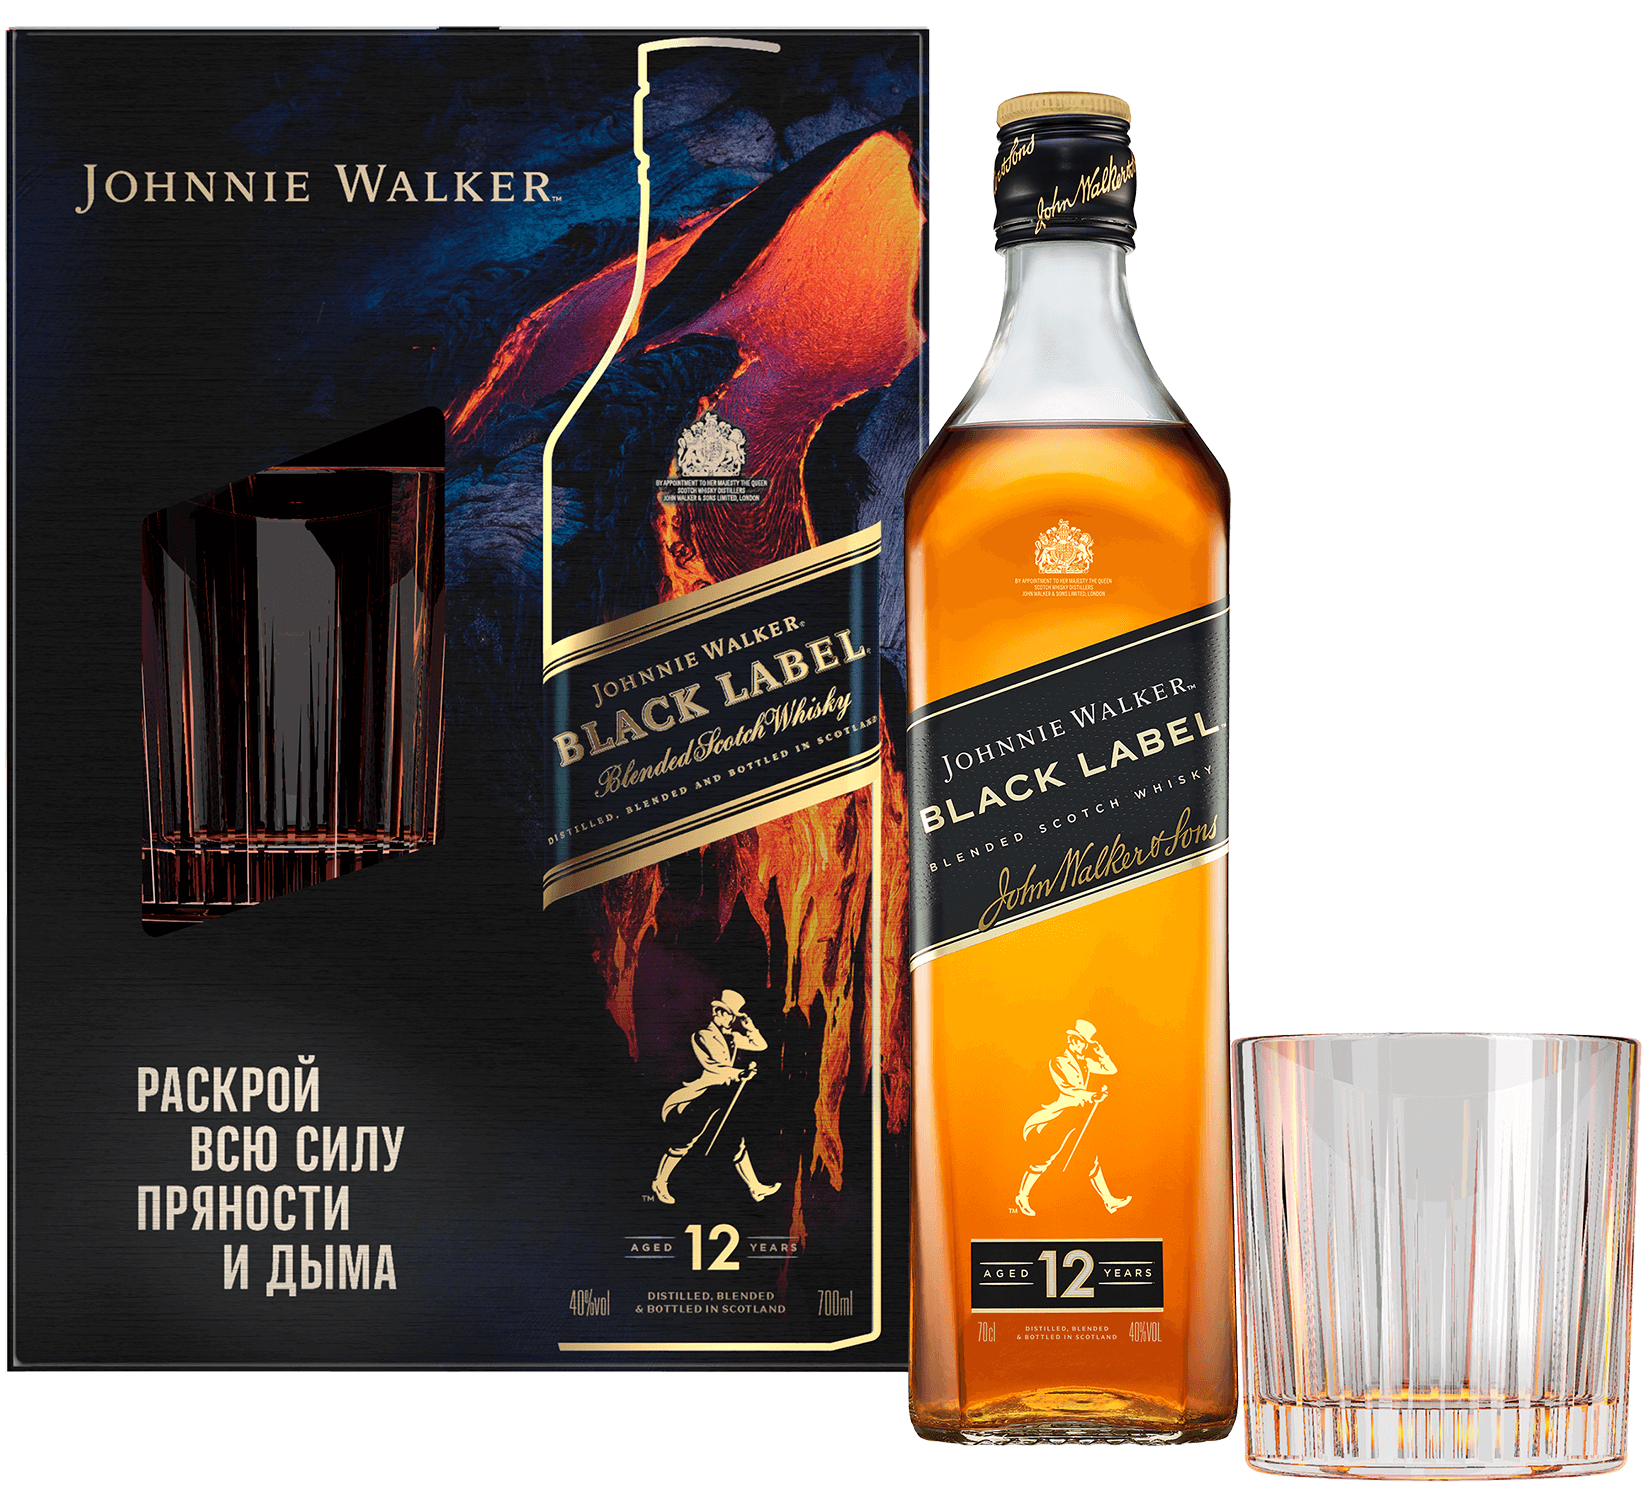 Johnnie Walker Black Label Blended Scotch Whisky (gift box with a glass) johnnie walker 18 y o blended scotch whisky gift box